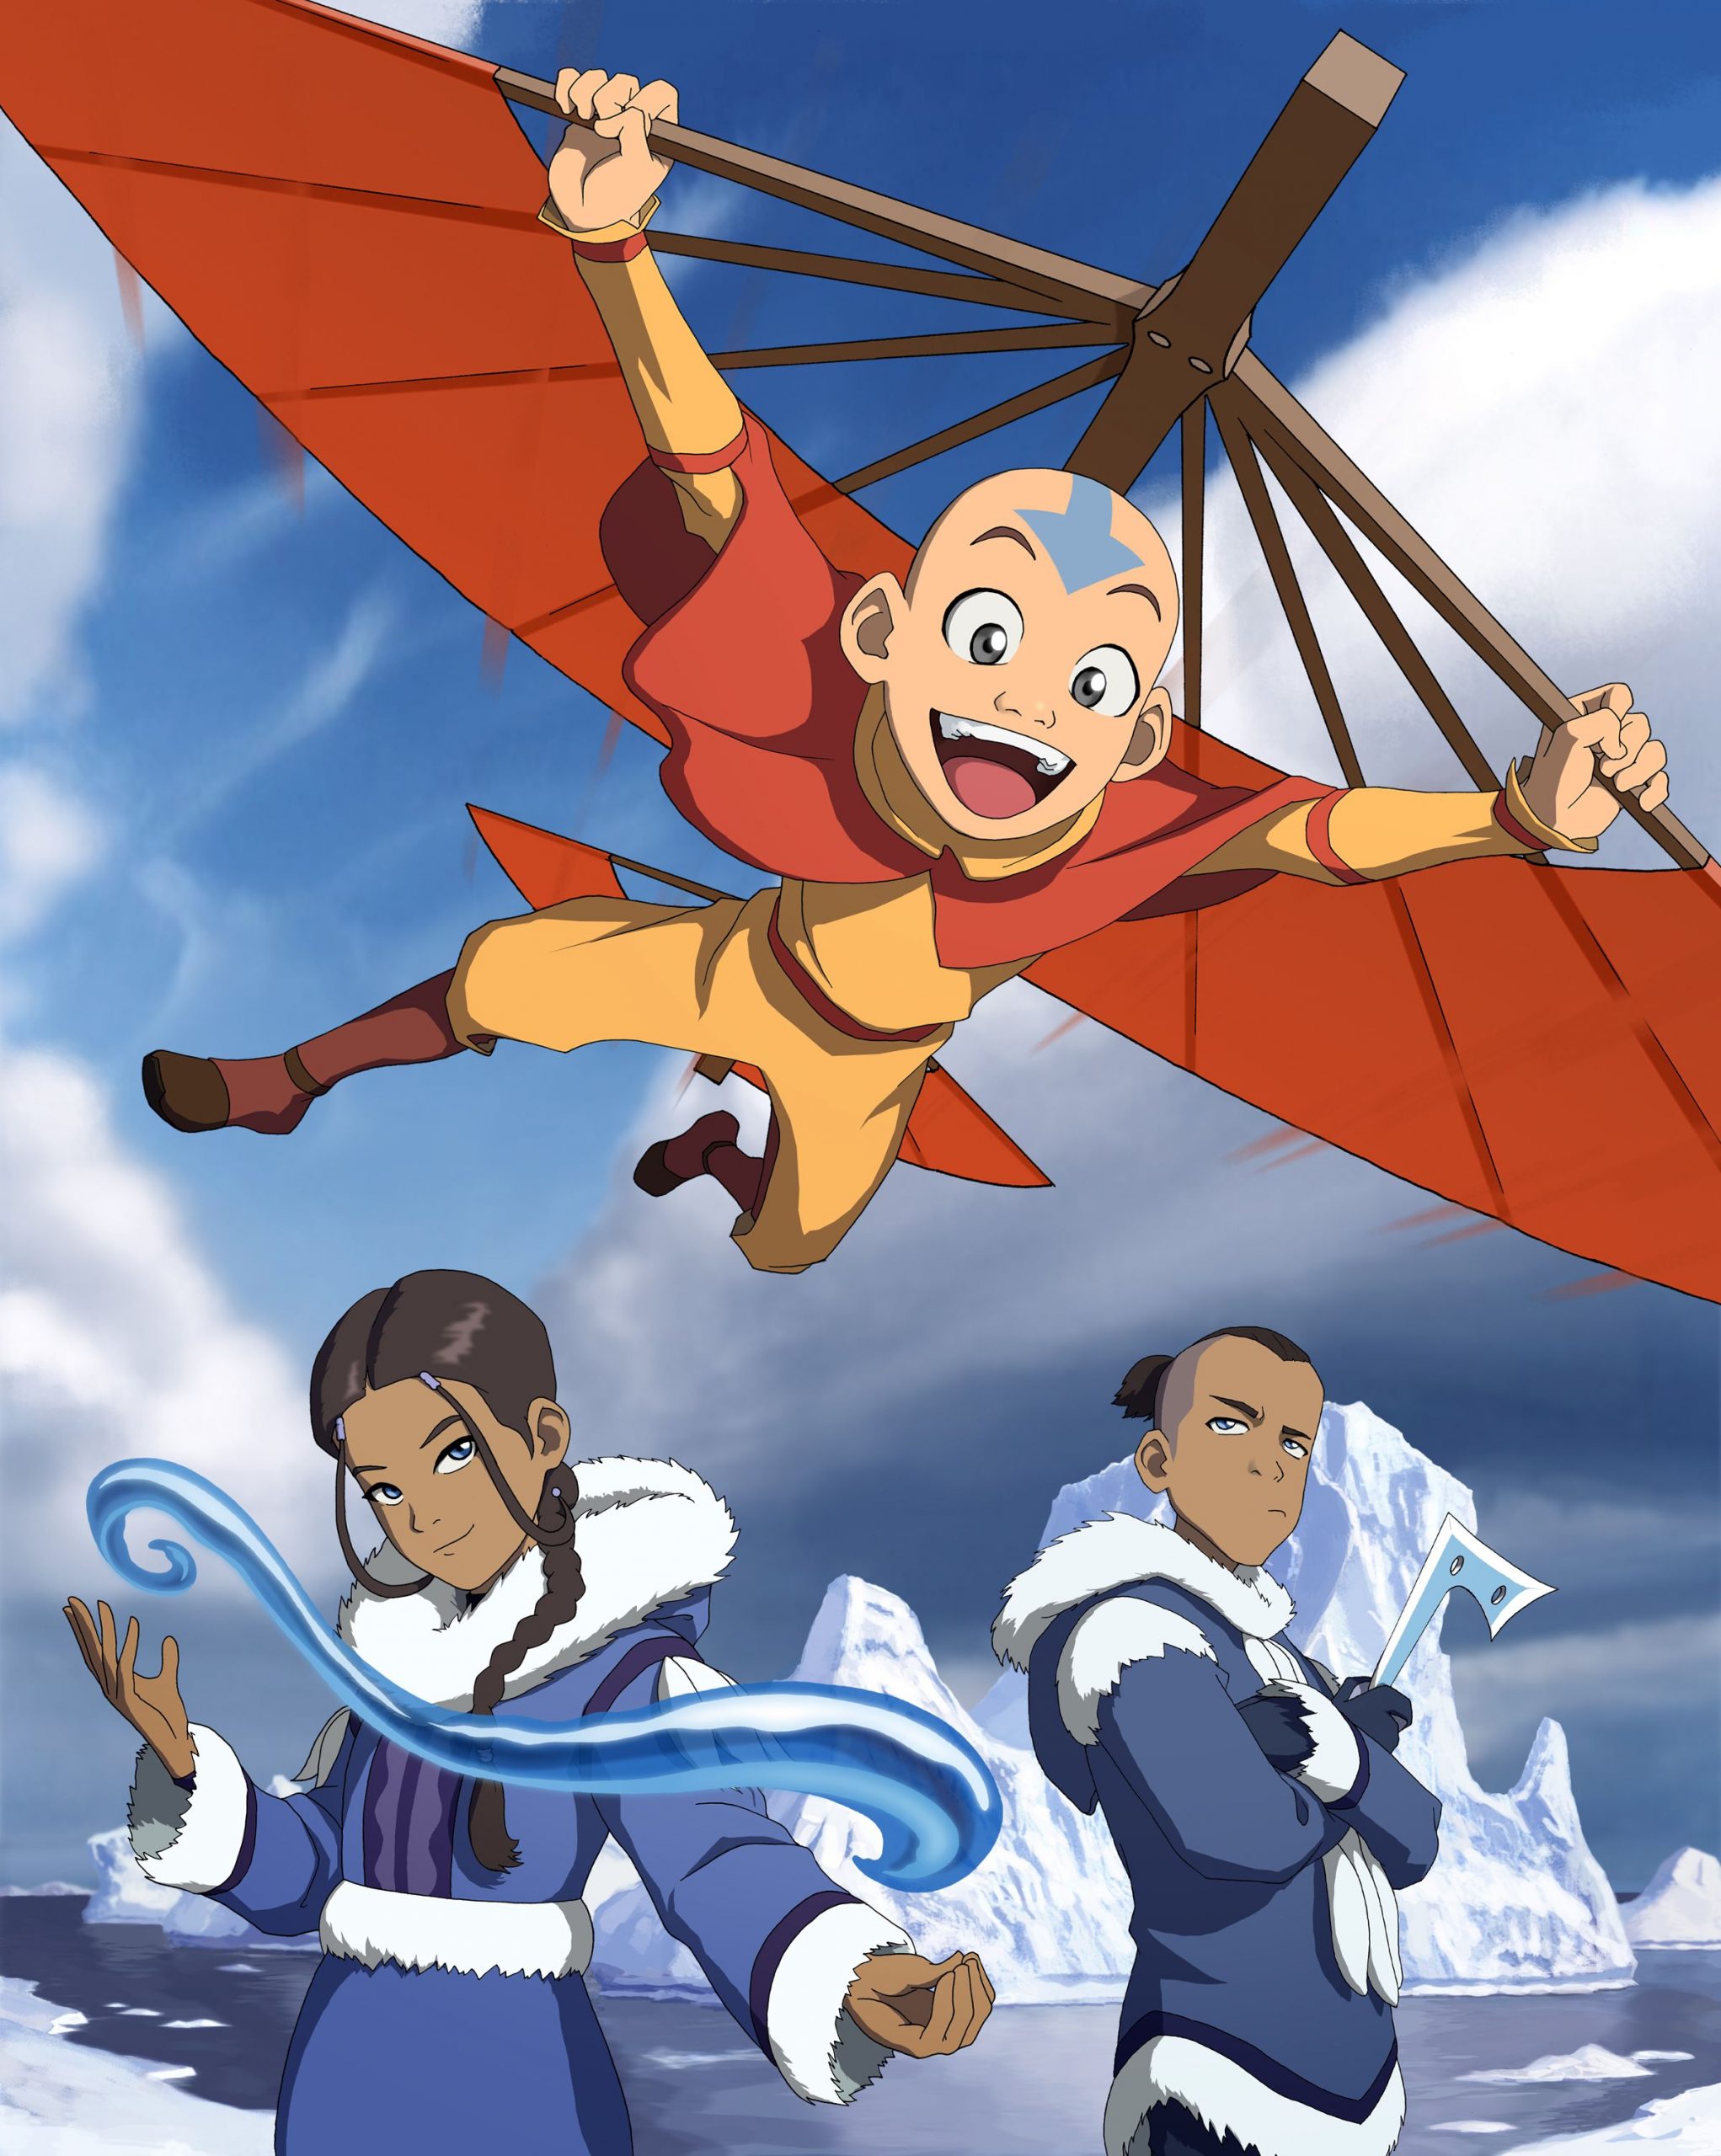 Katara, a young Waterbender and her warrior brother Sokka rescue a boy, Aang, from a cavernous iceberg.(Nickelodeon/TNS)